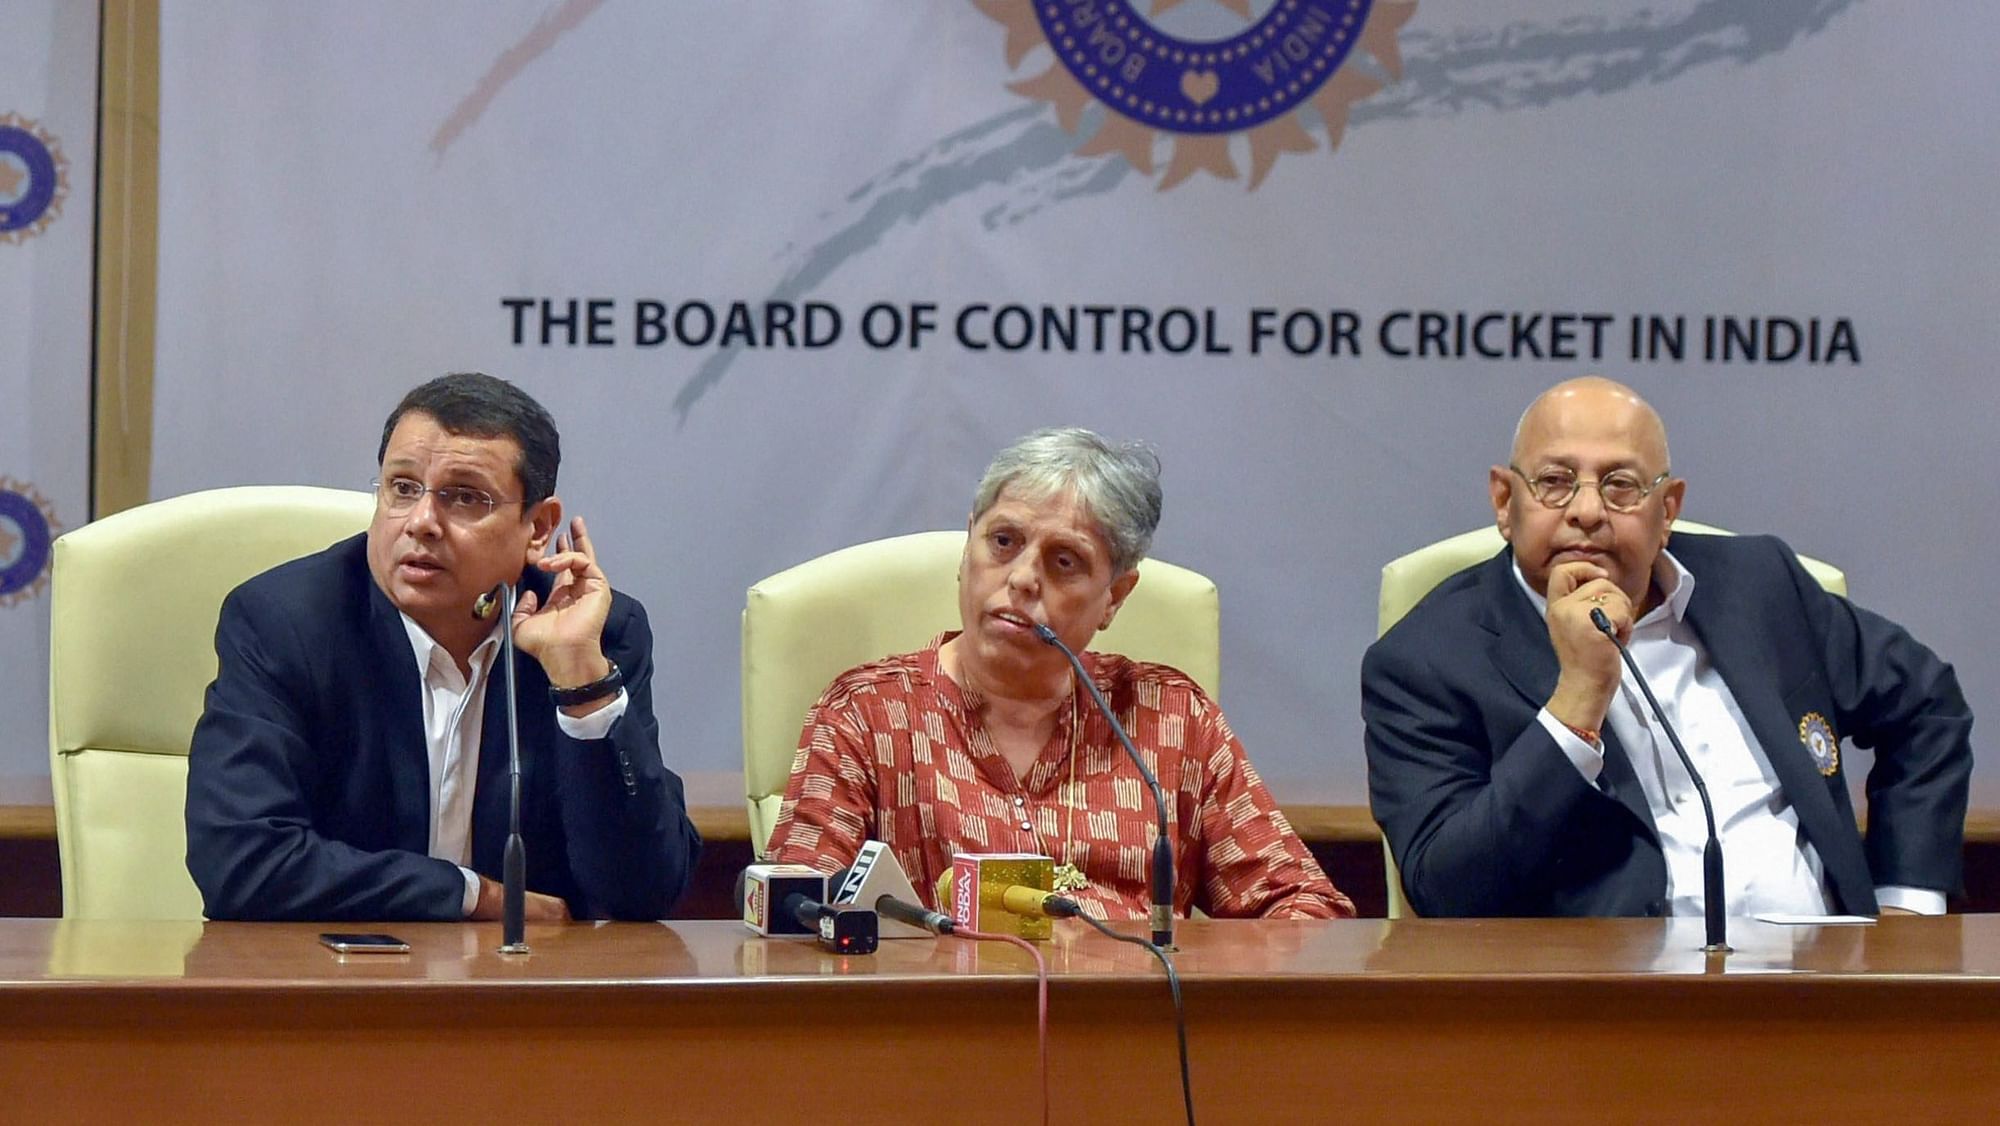 BCCI officials have said they feel the COA has buckled under pressure to comply with the NADA.